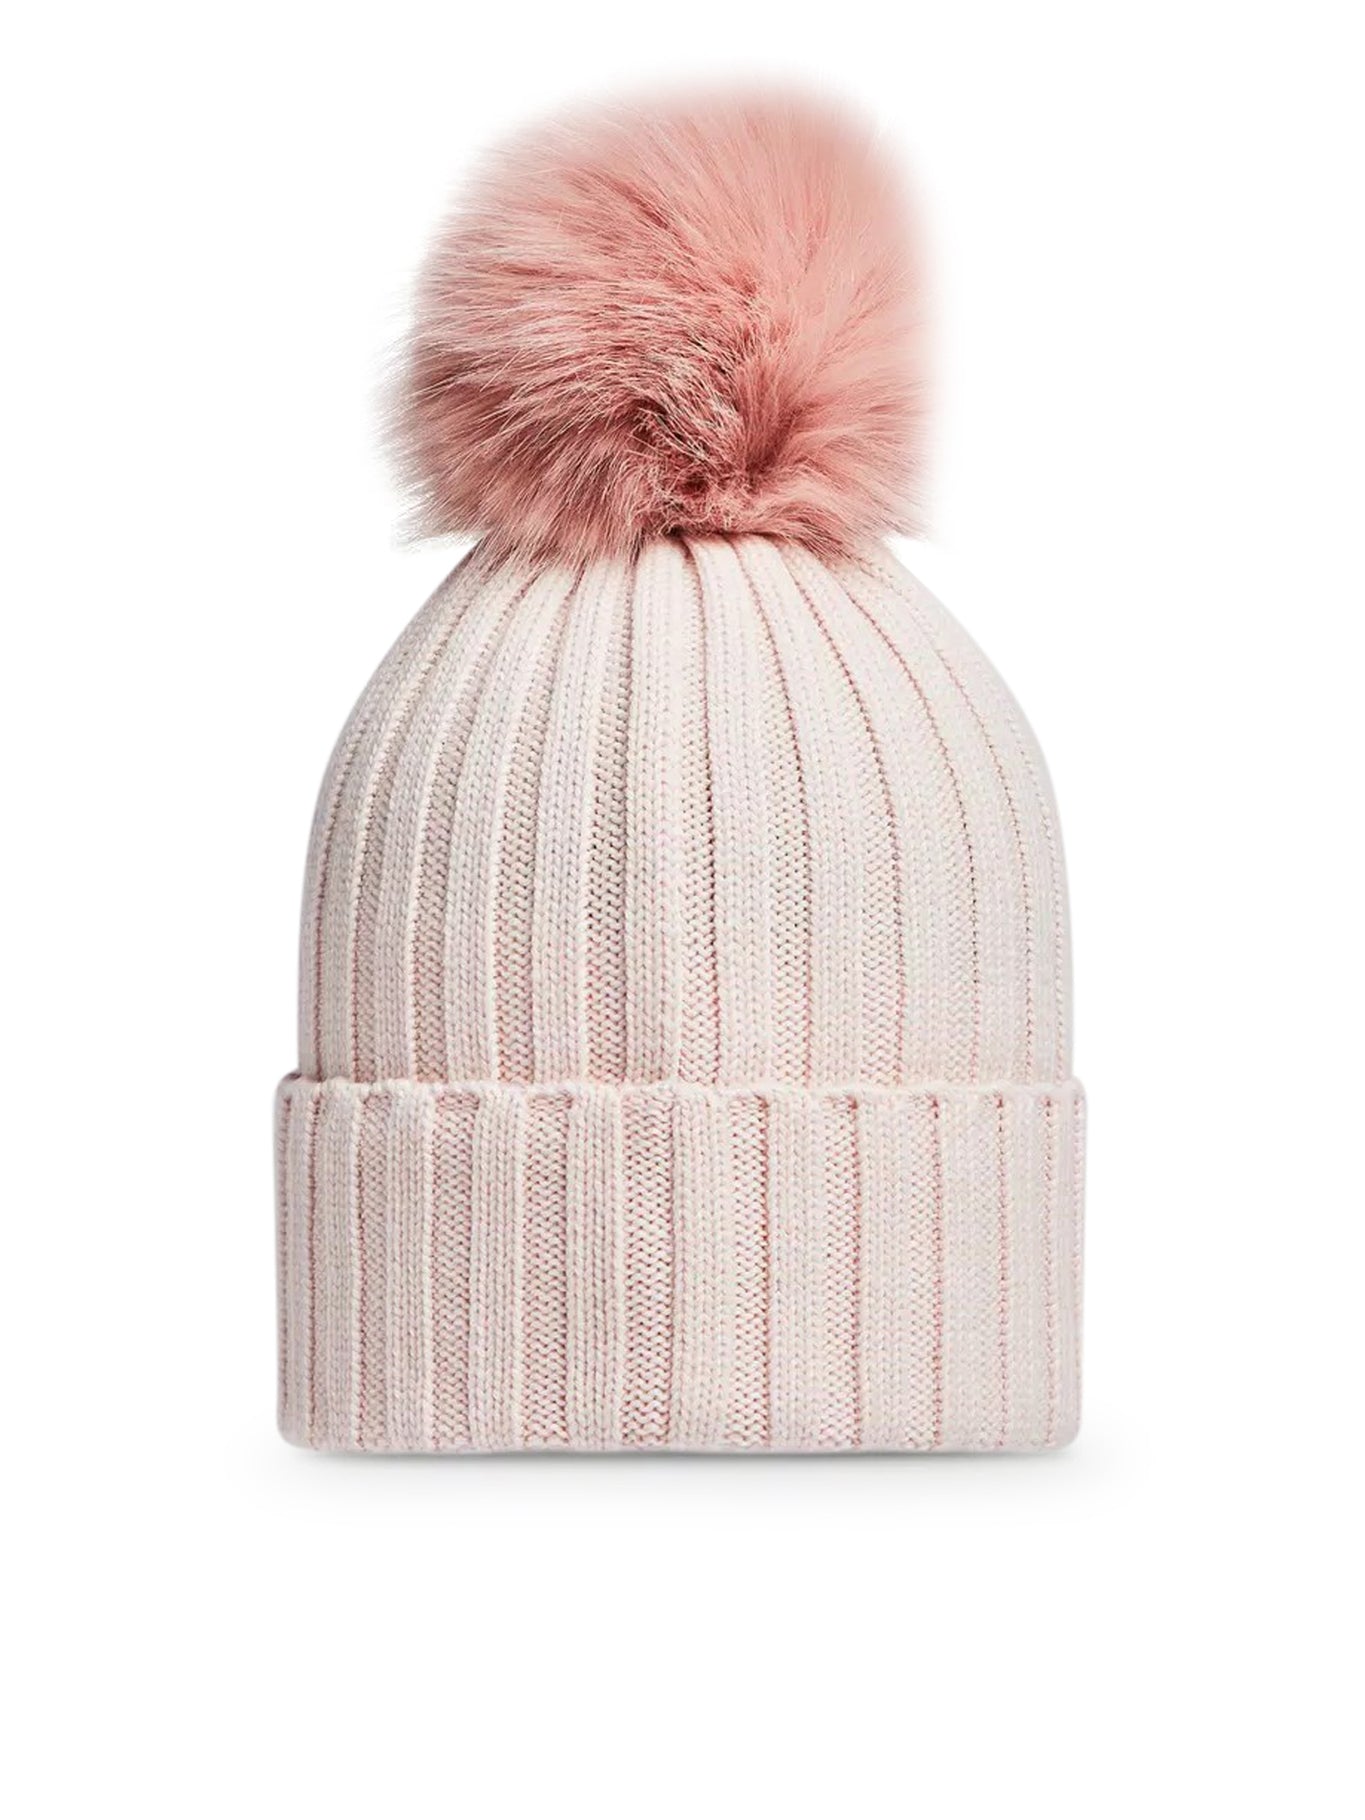 WOOL HAT WITH PON POM